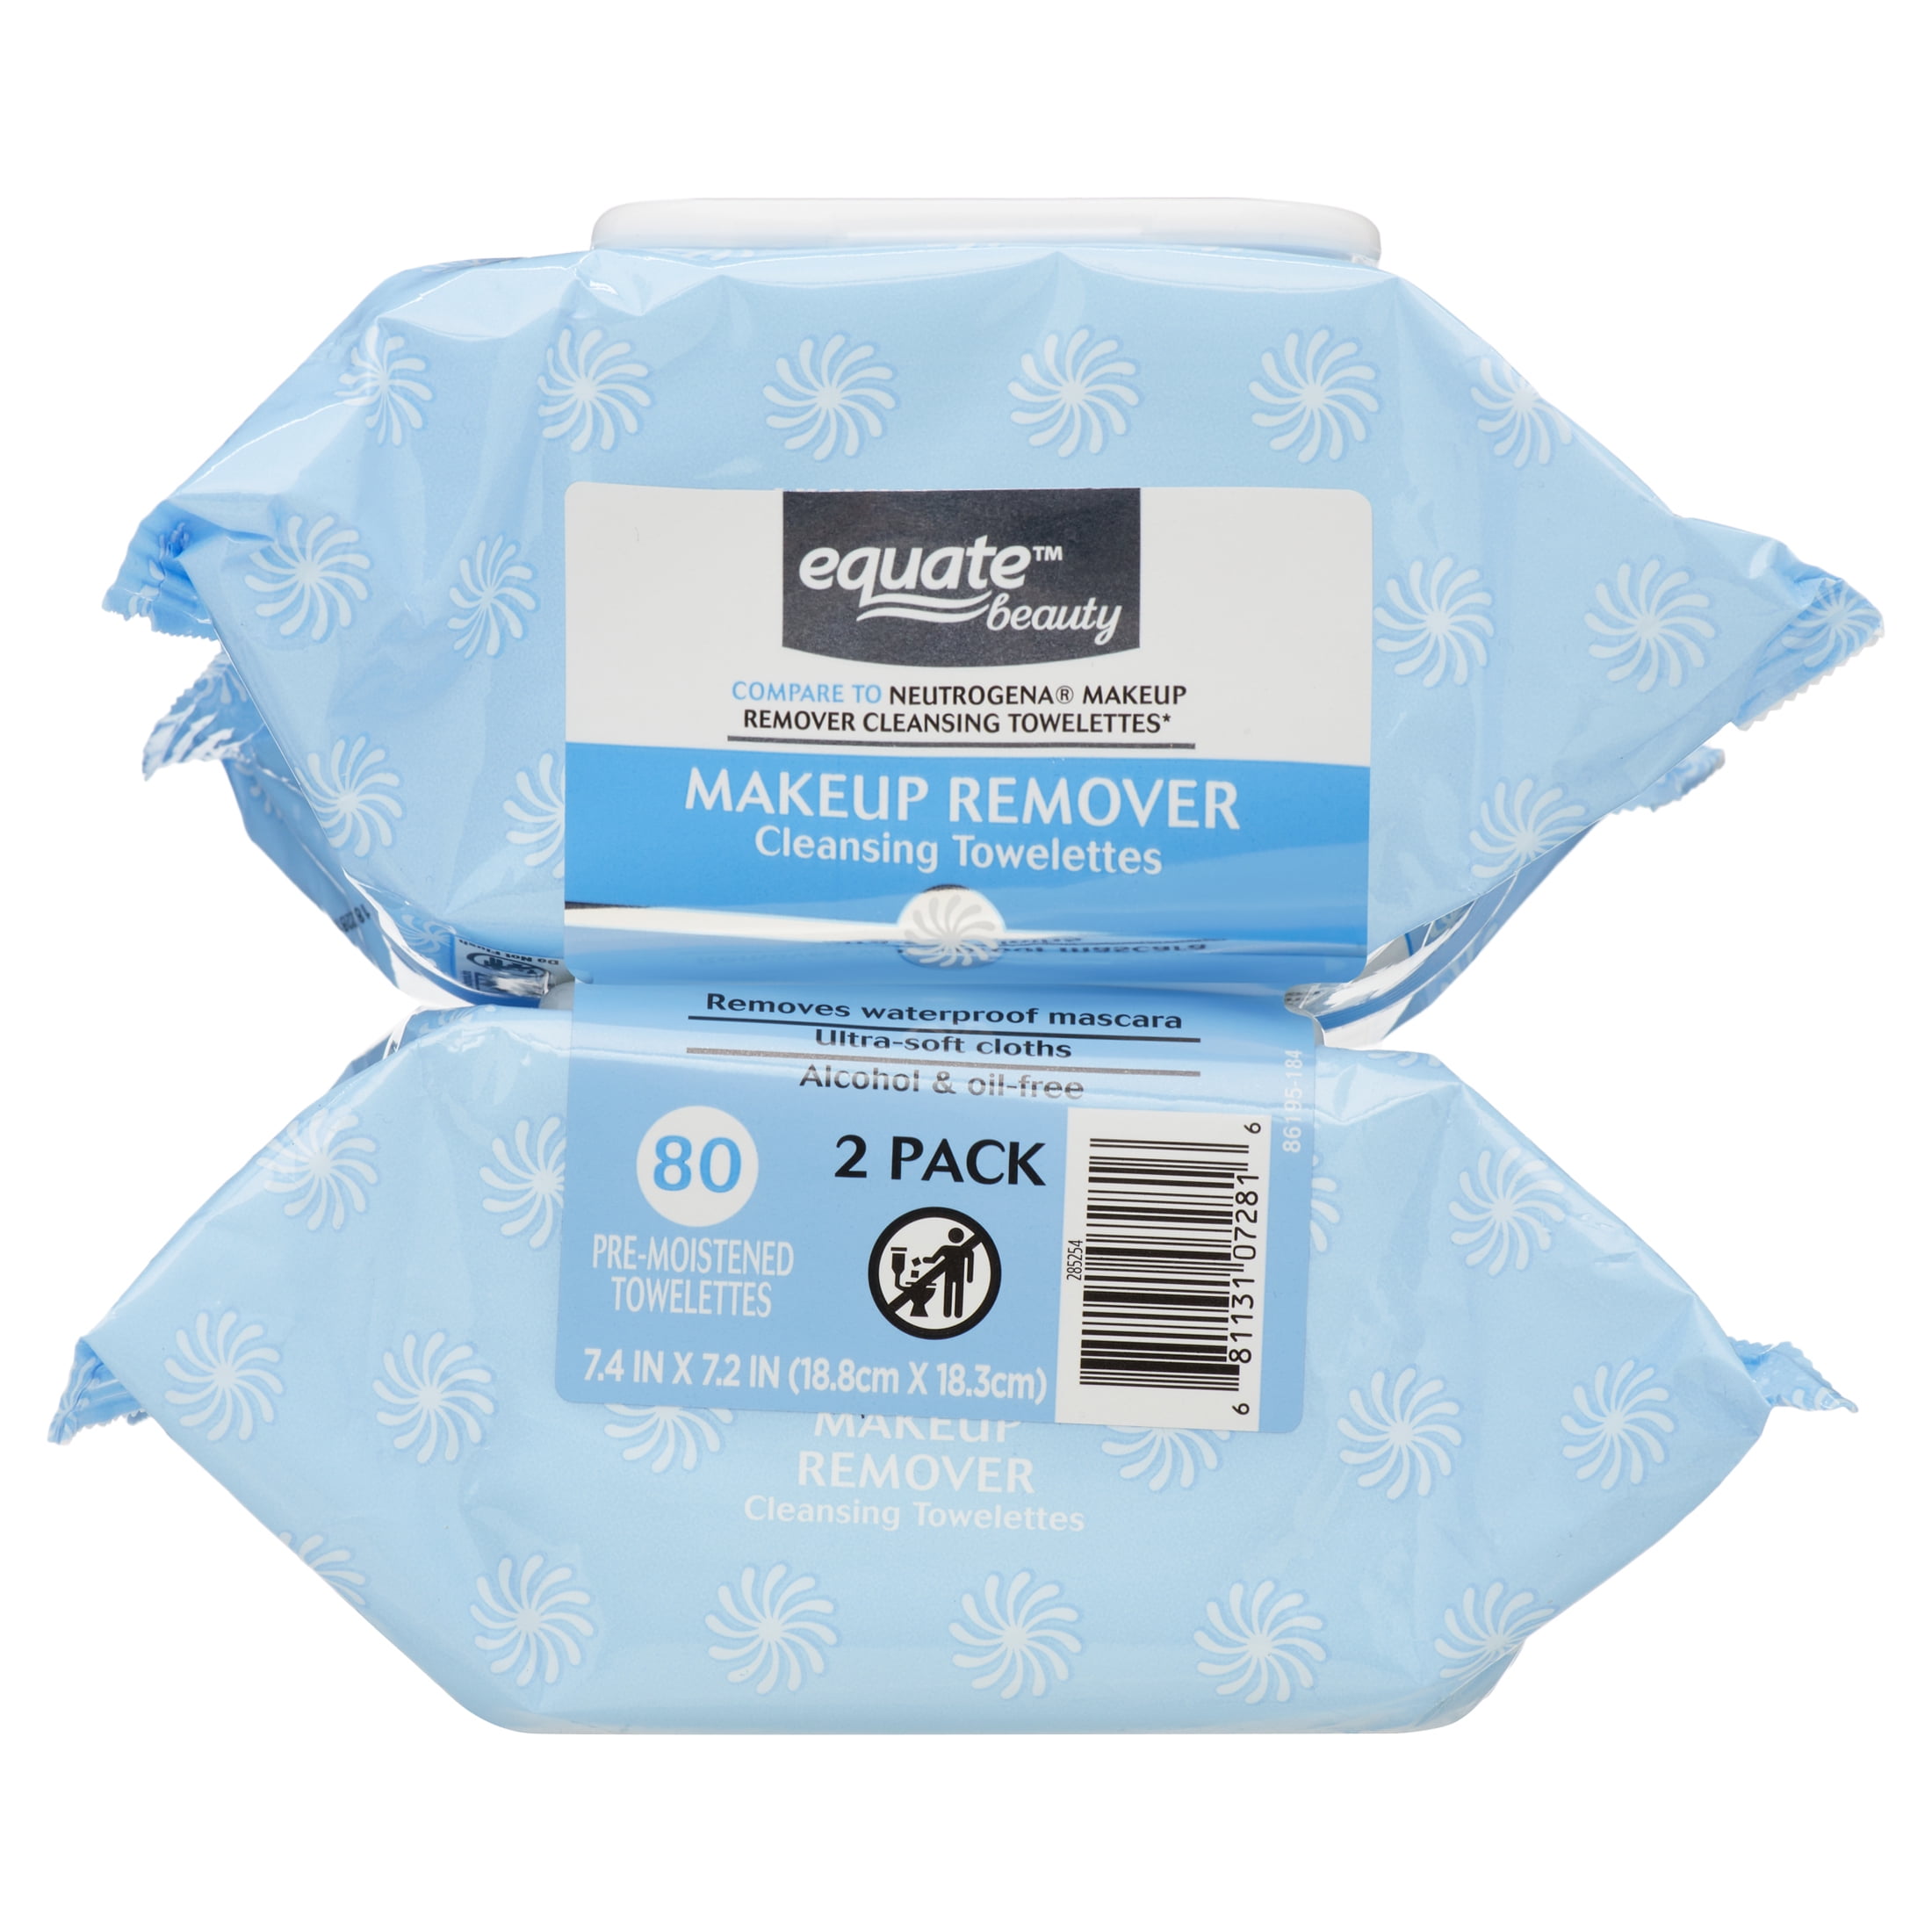 Minister Antarktis konsol Equate Beauty Makeup Remover Cleansing Towelettes, 40 Count, 2 Pack -  Walmart.com